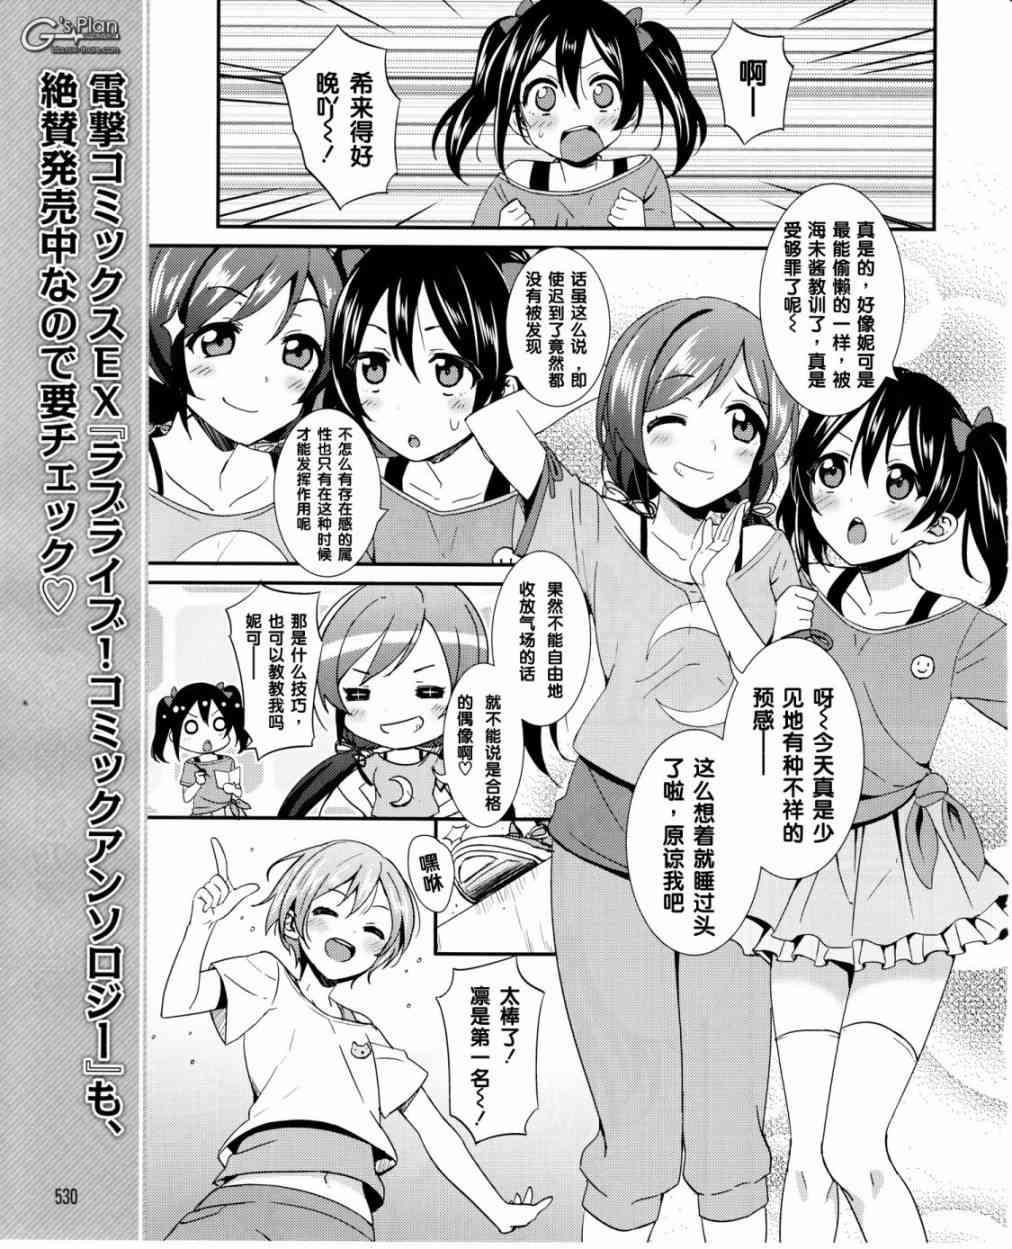 LoveLive - 17話 - 2